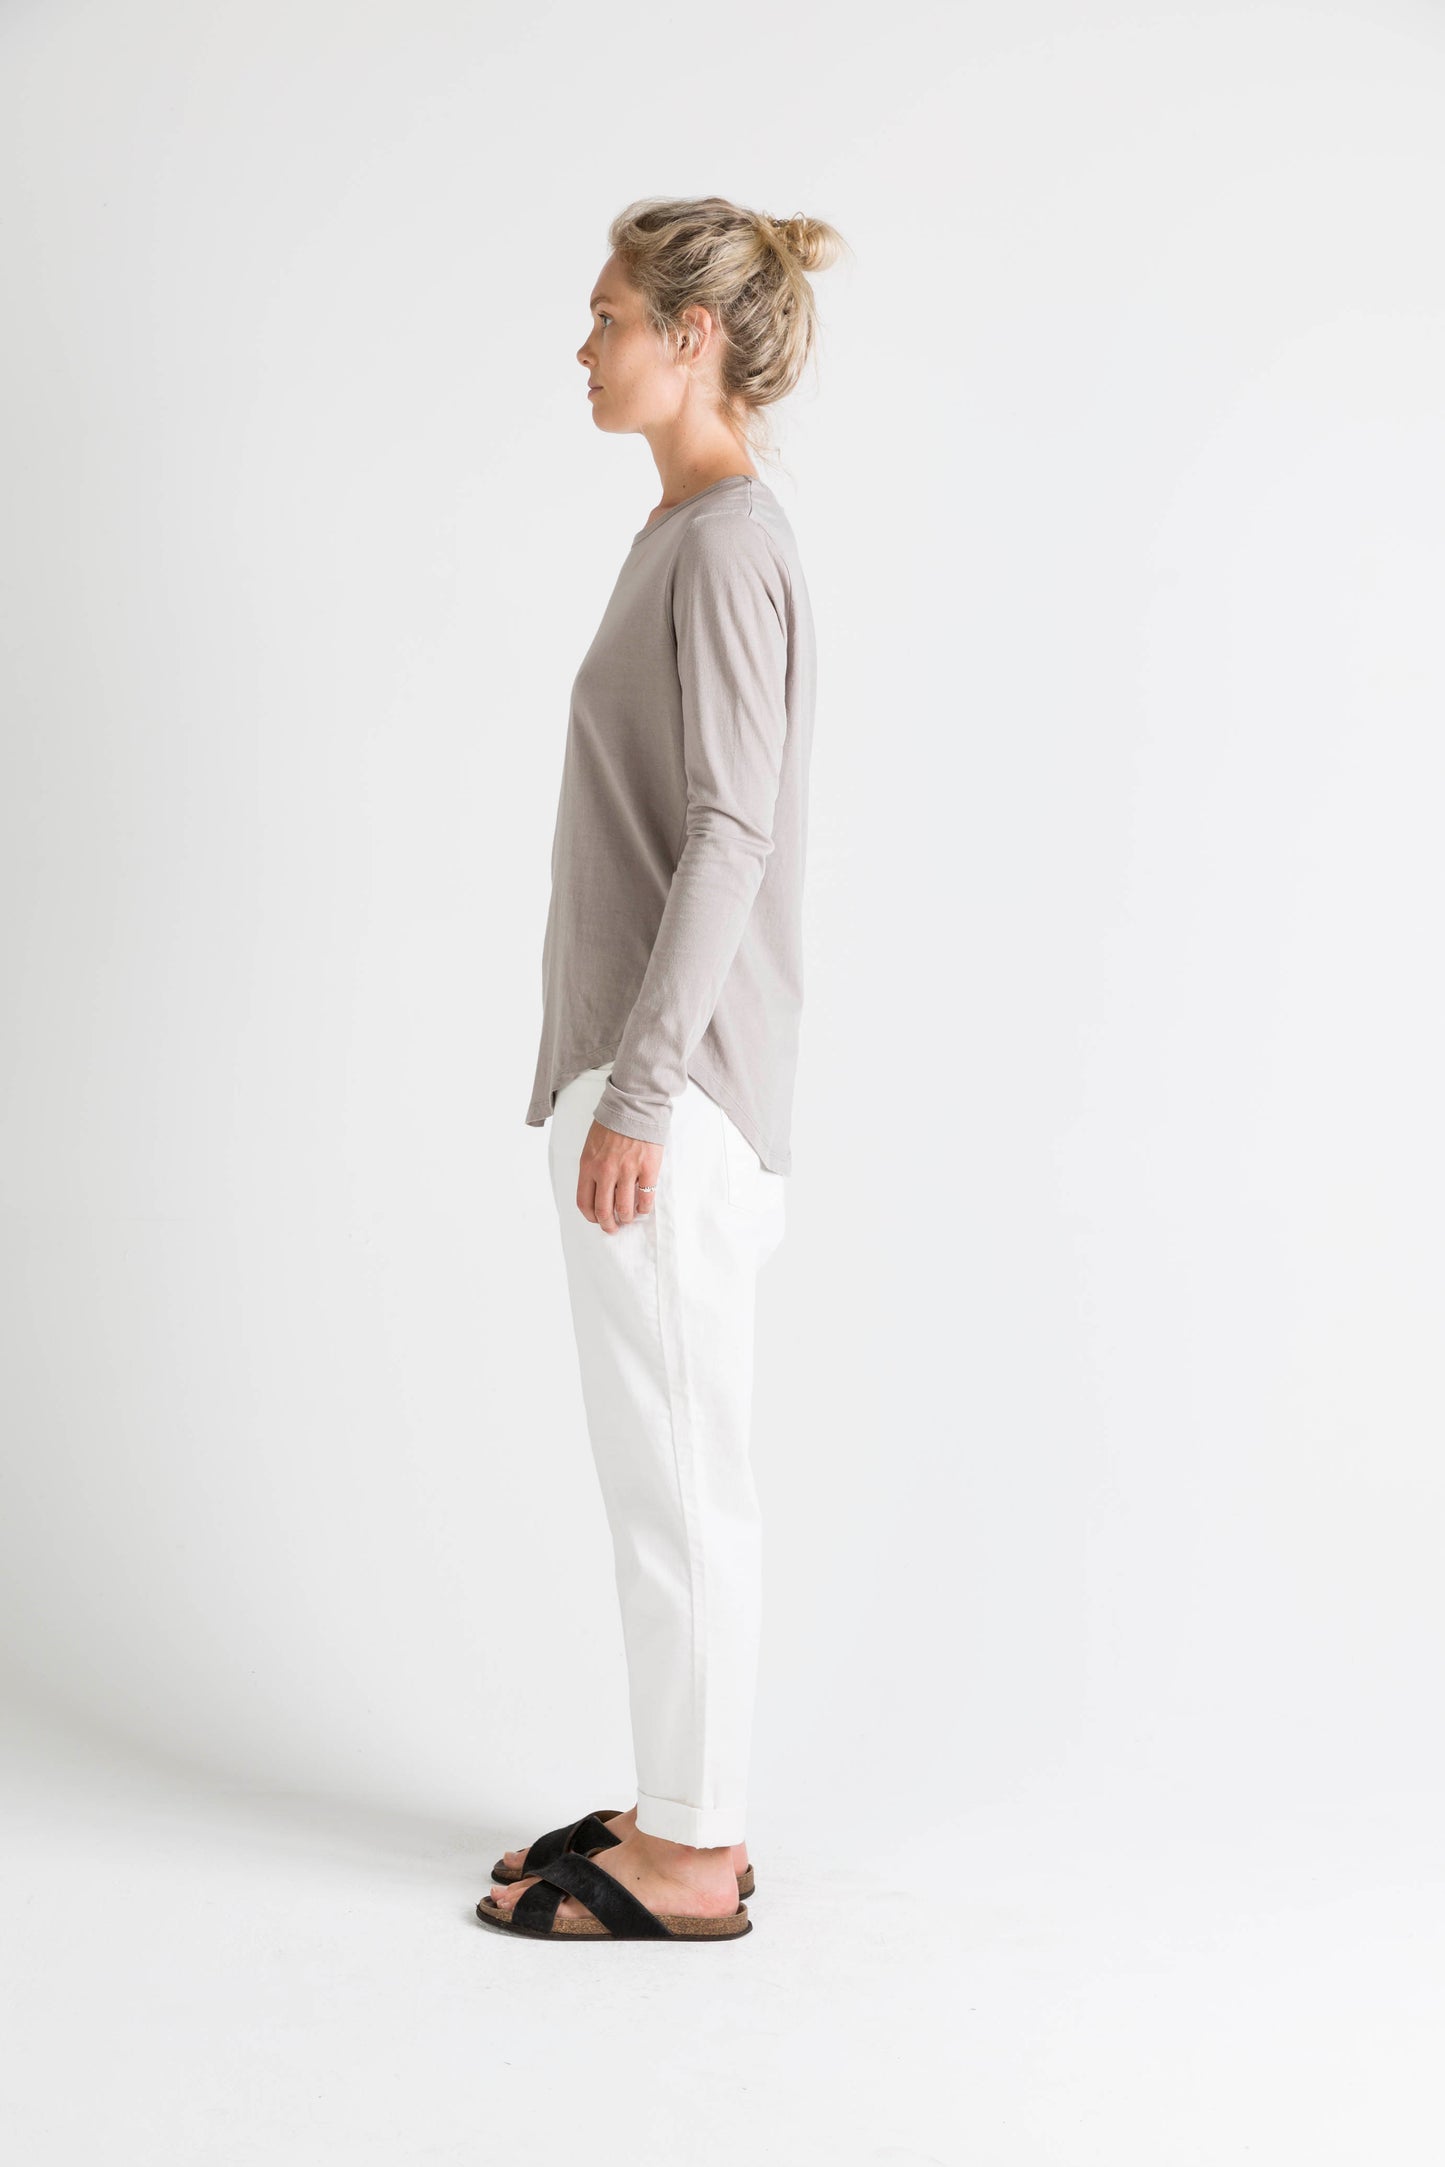 Ophelia and Ryder Long Sleeve T-Shirt